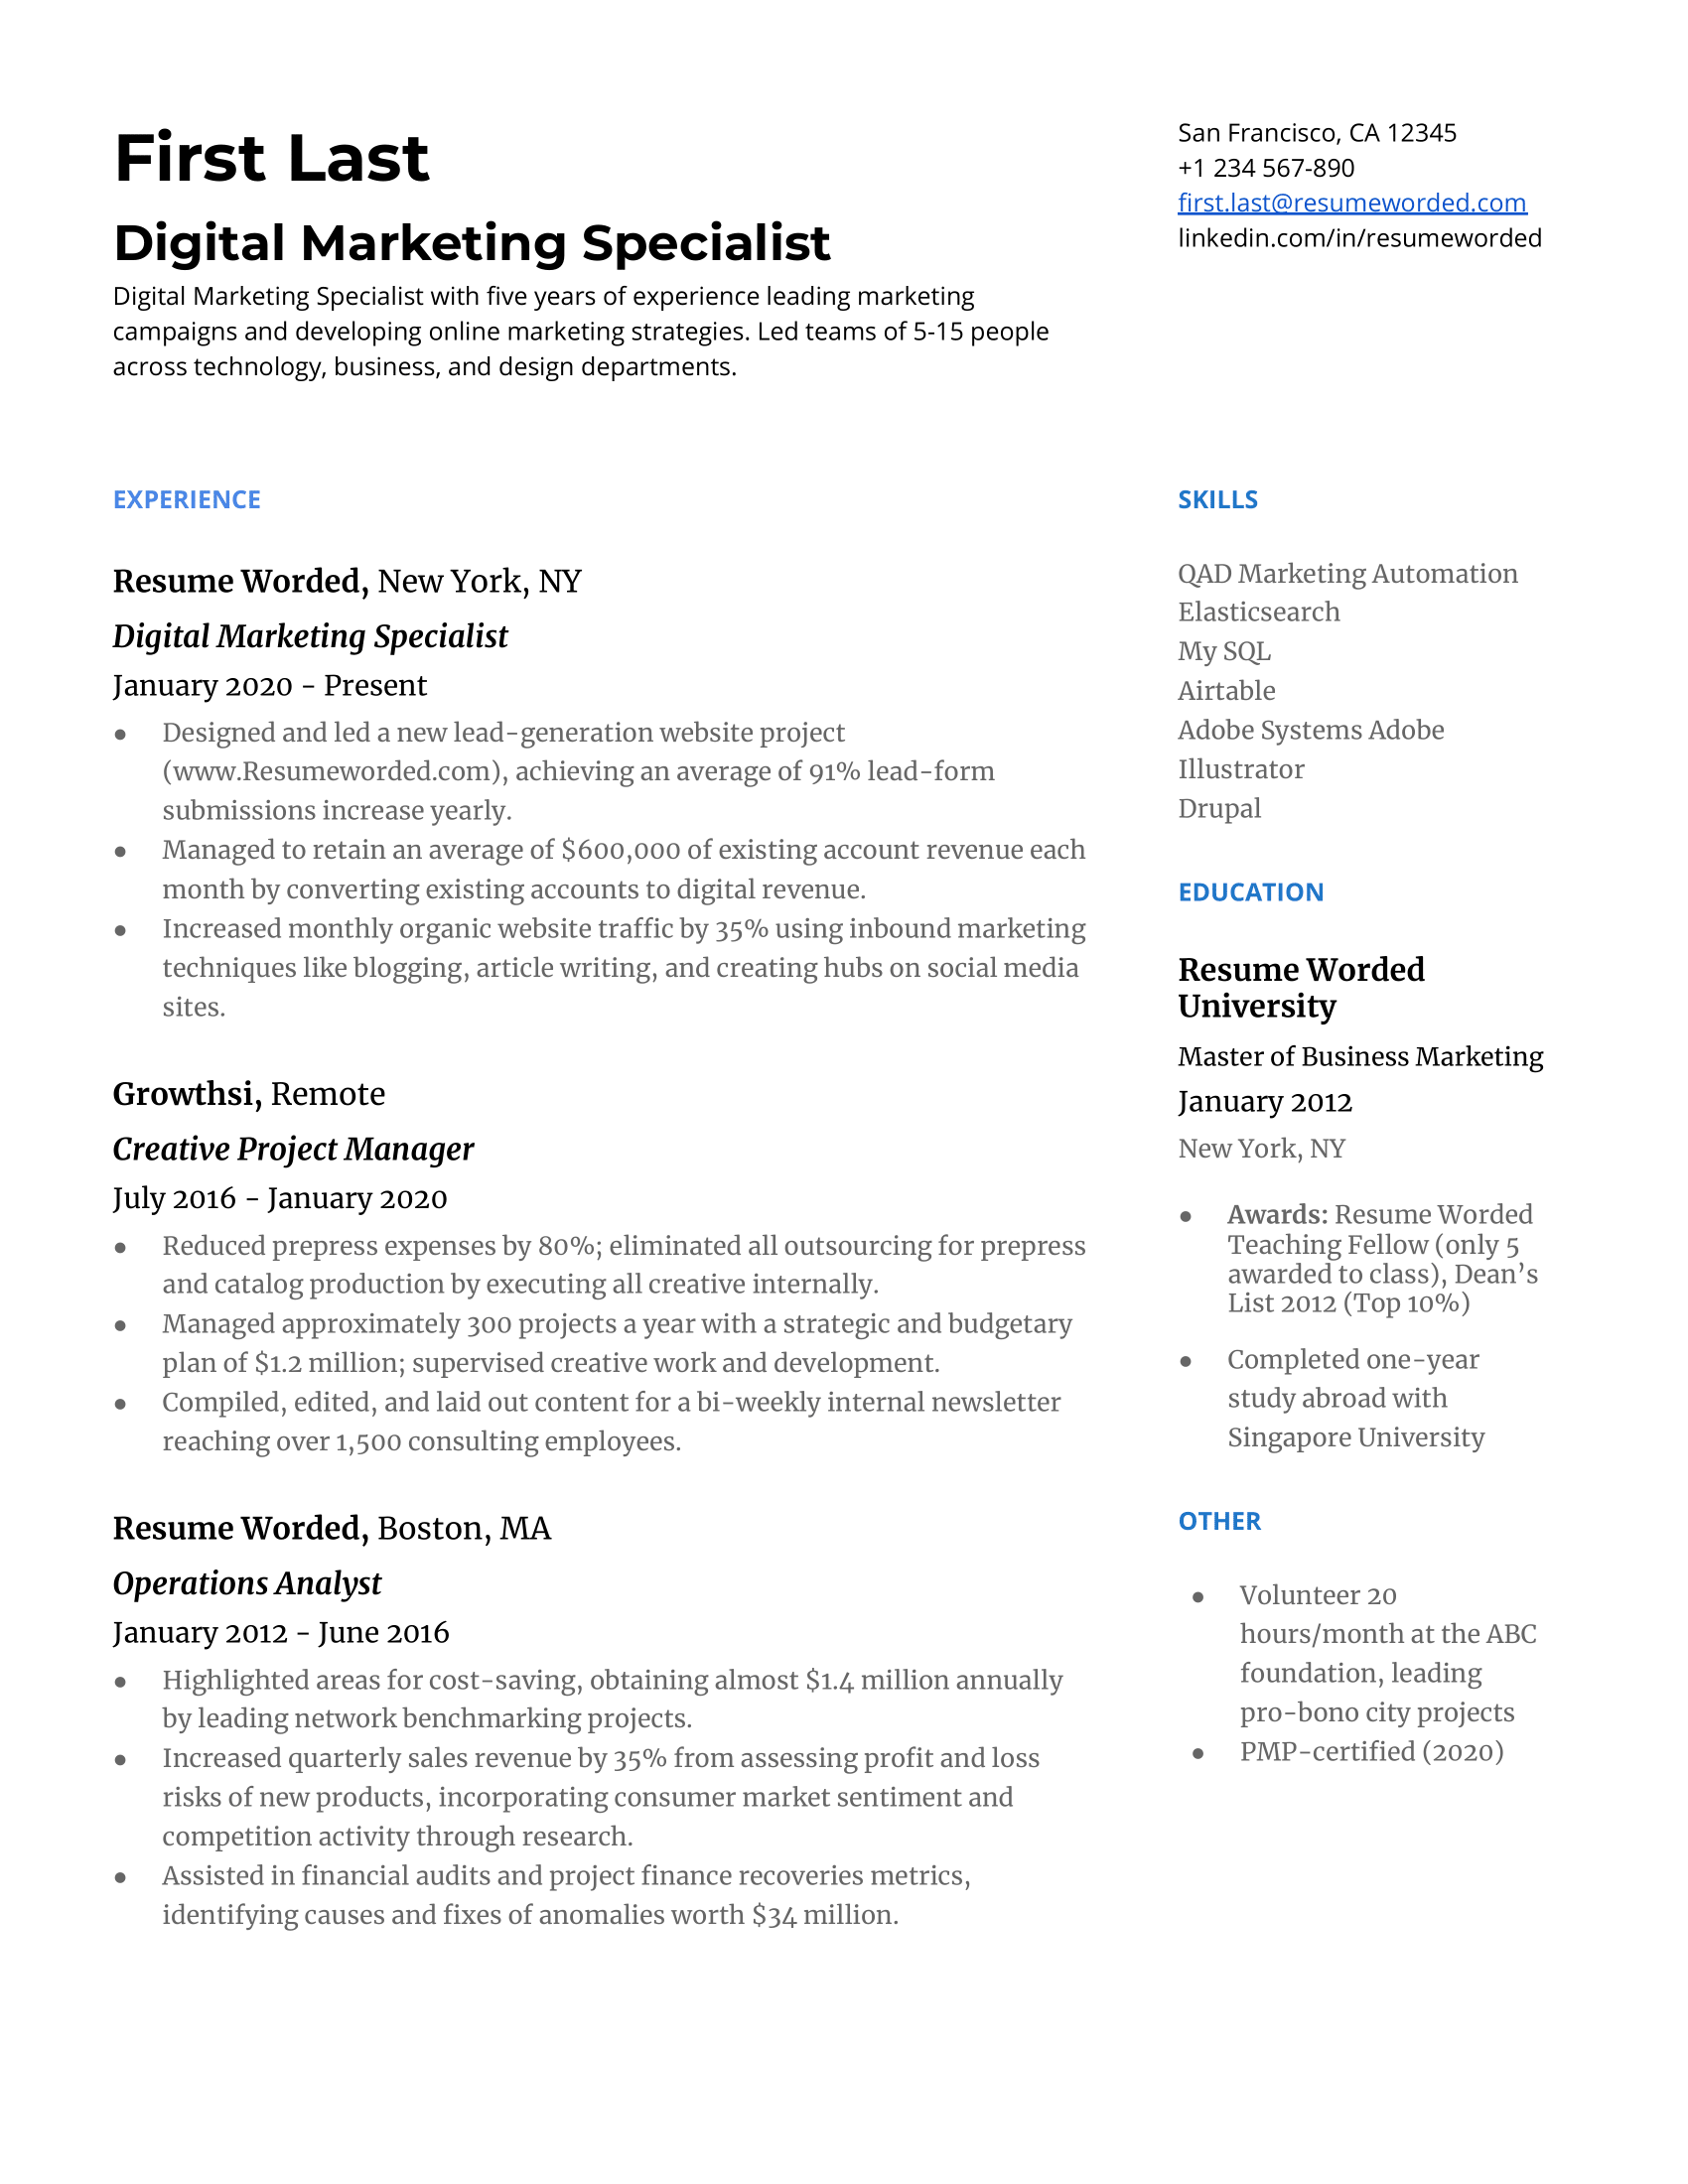 A general digital marketing resume with 5+ years of experience, relevant hard skills, and education.   